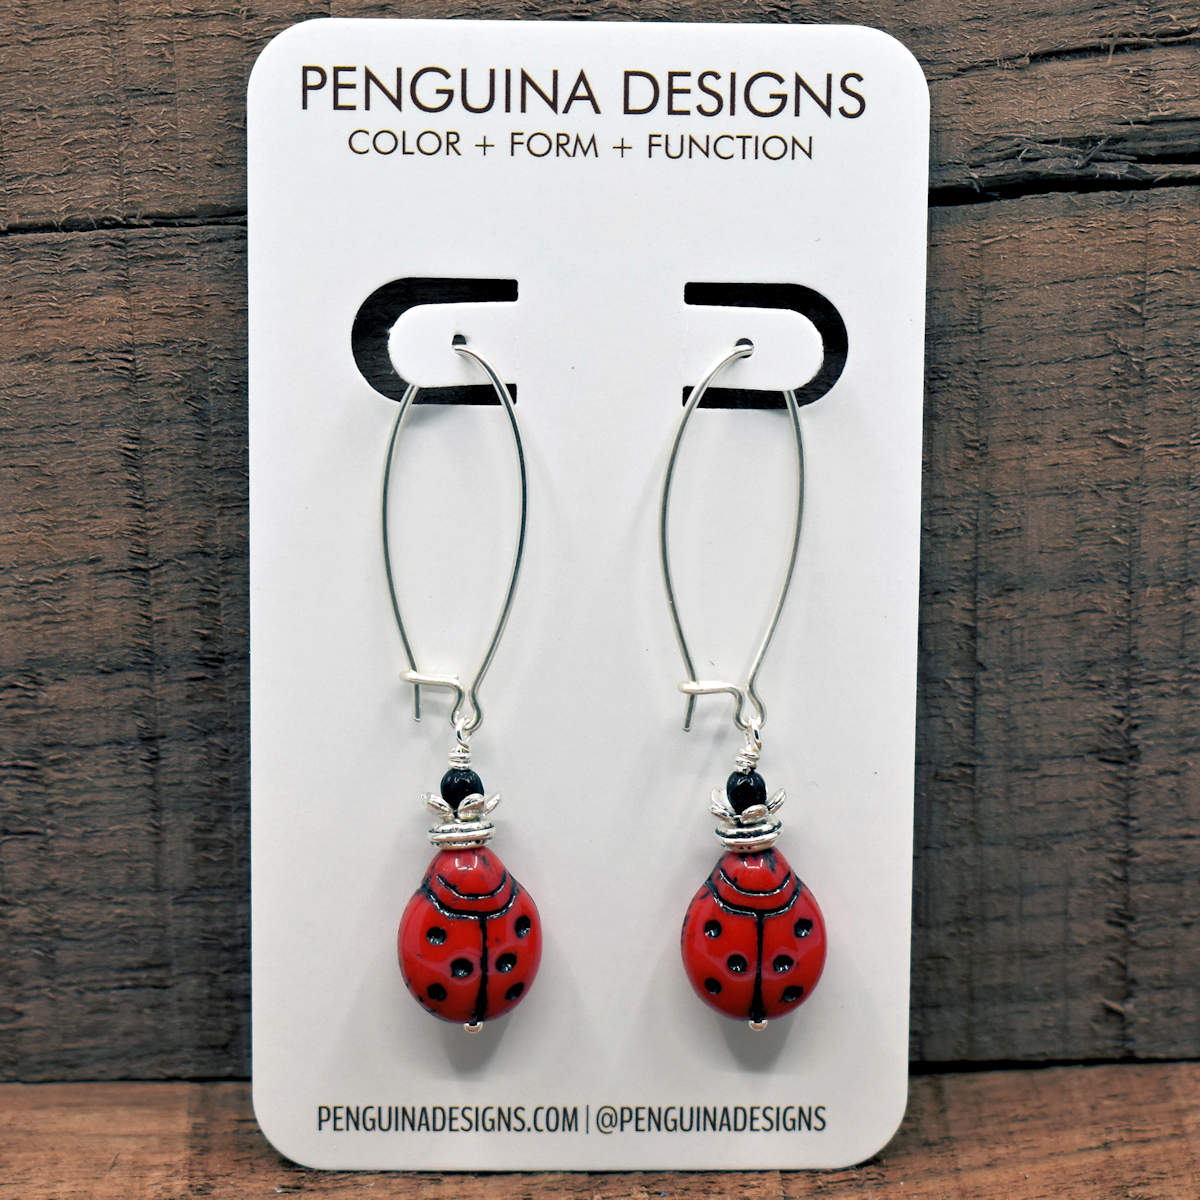 A pair of earrings on a white card rest against a wood background. The earrings have long silver oval wires that latch and have red glass lady bugs at the bottom.